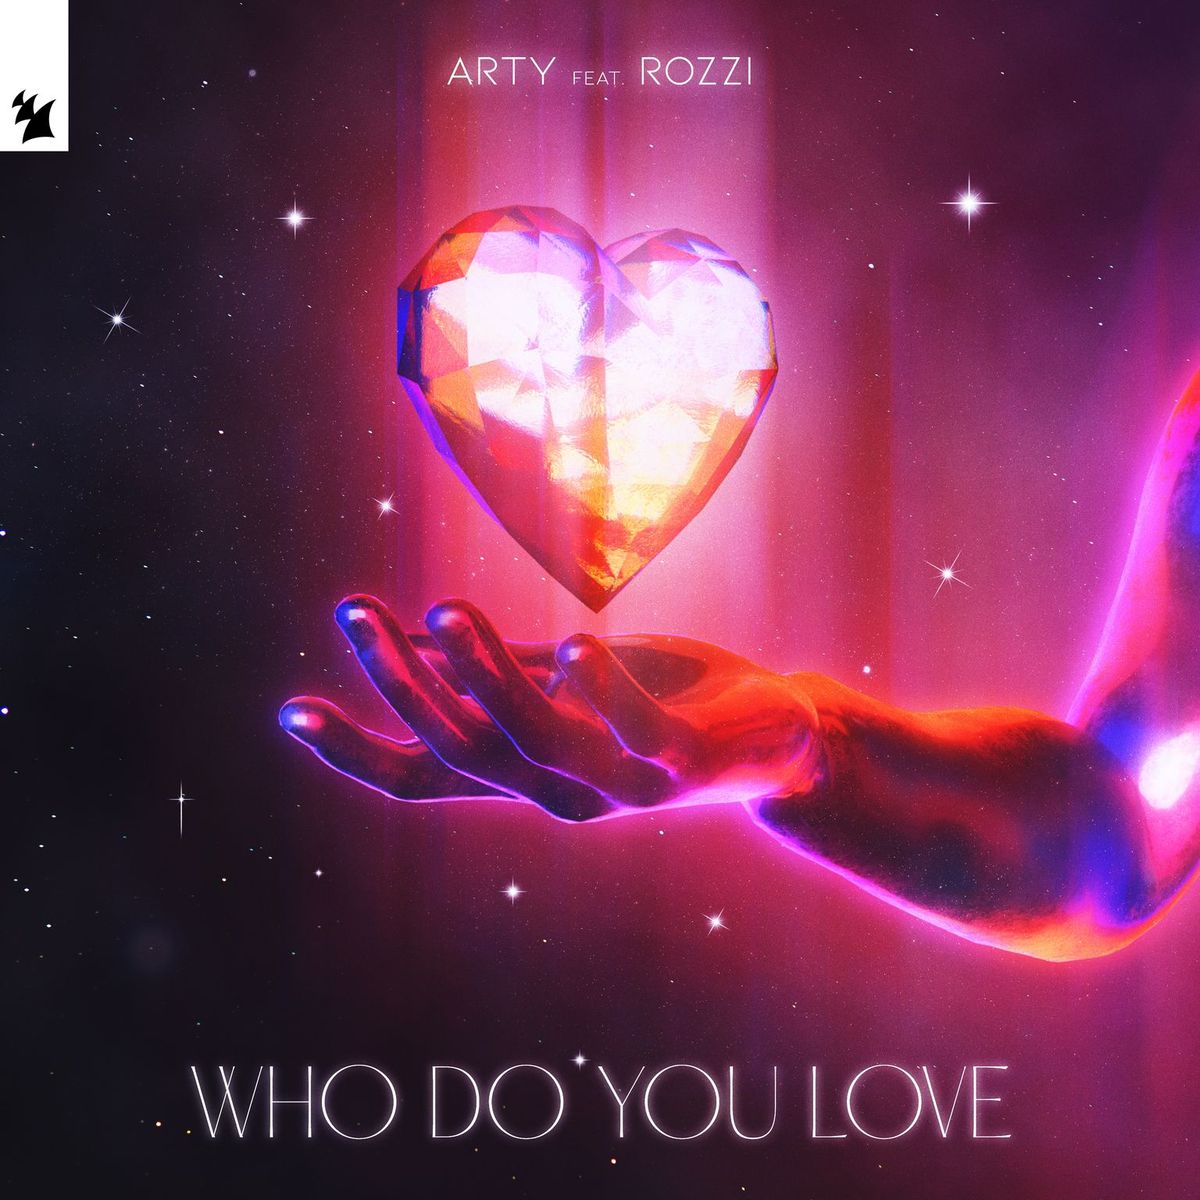 ARTY feat. Rozzi presents Who Do You Love on Armada Music